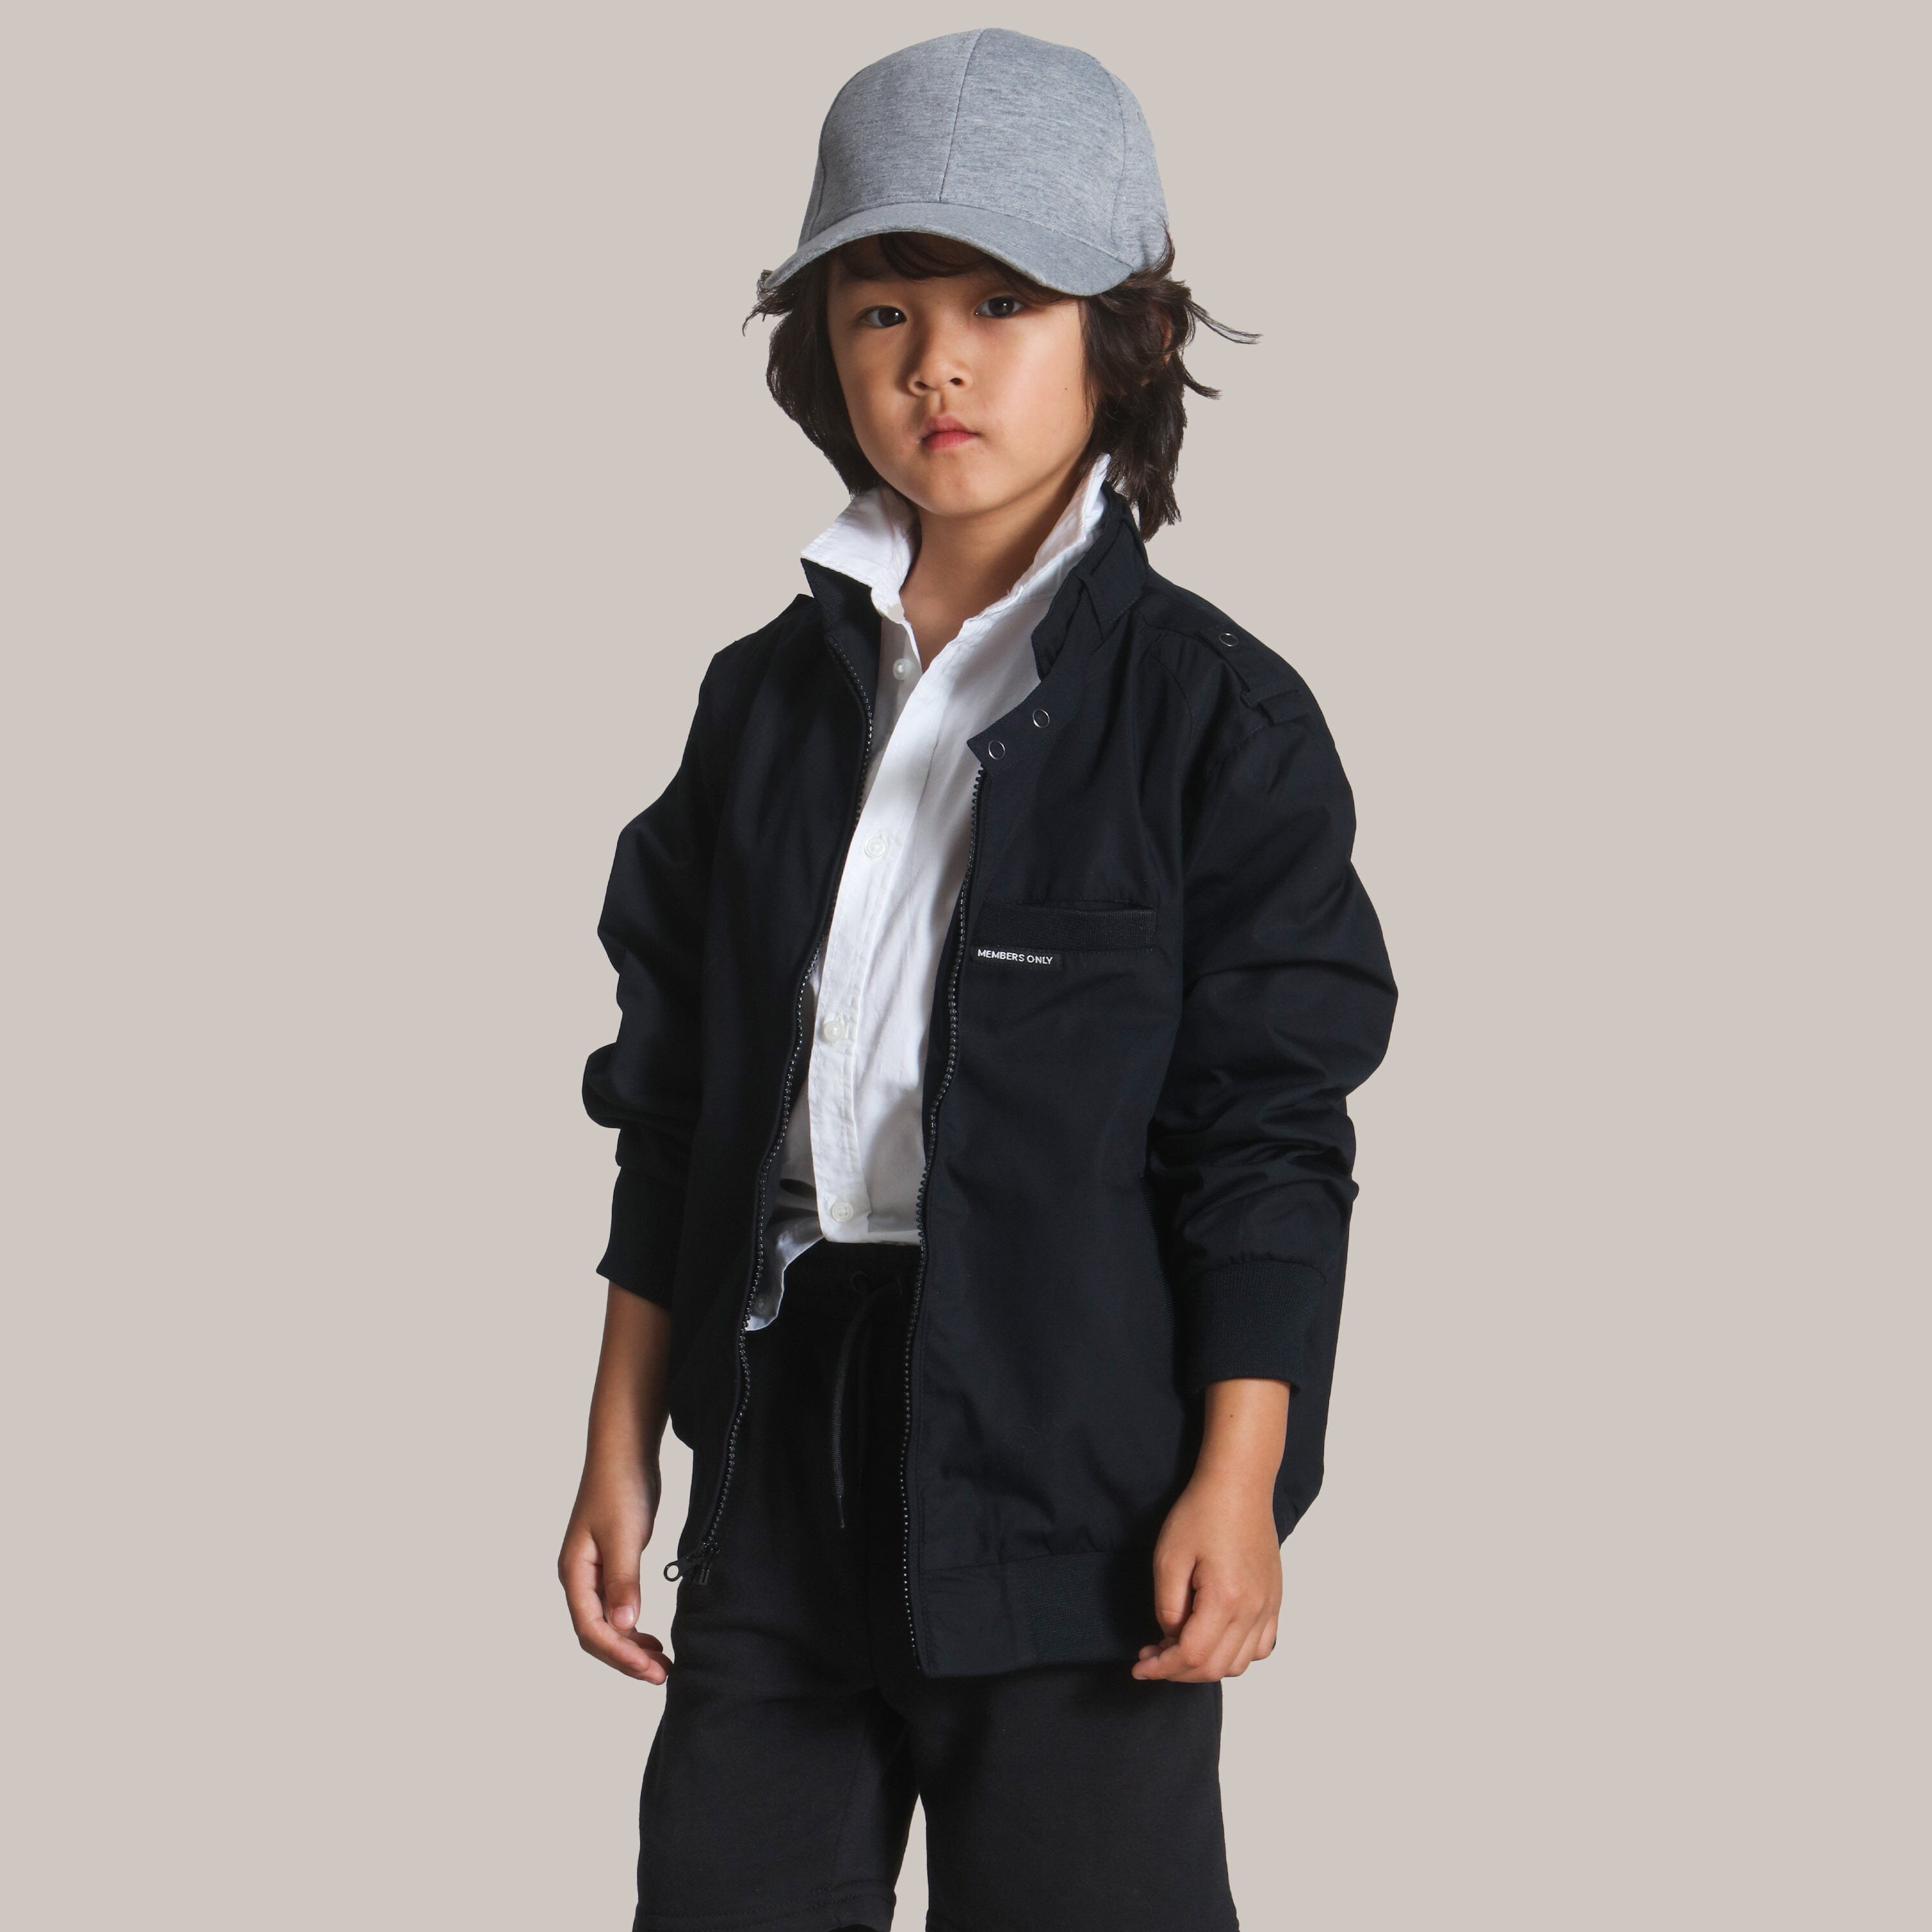 Boy's Iconic Racer Jacket Kid's Jacket Members Only 